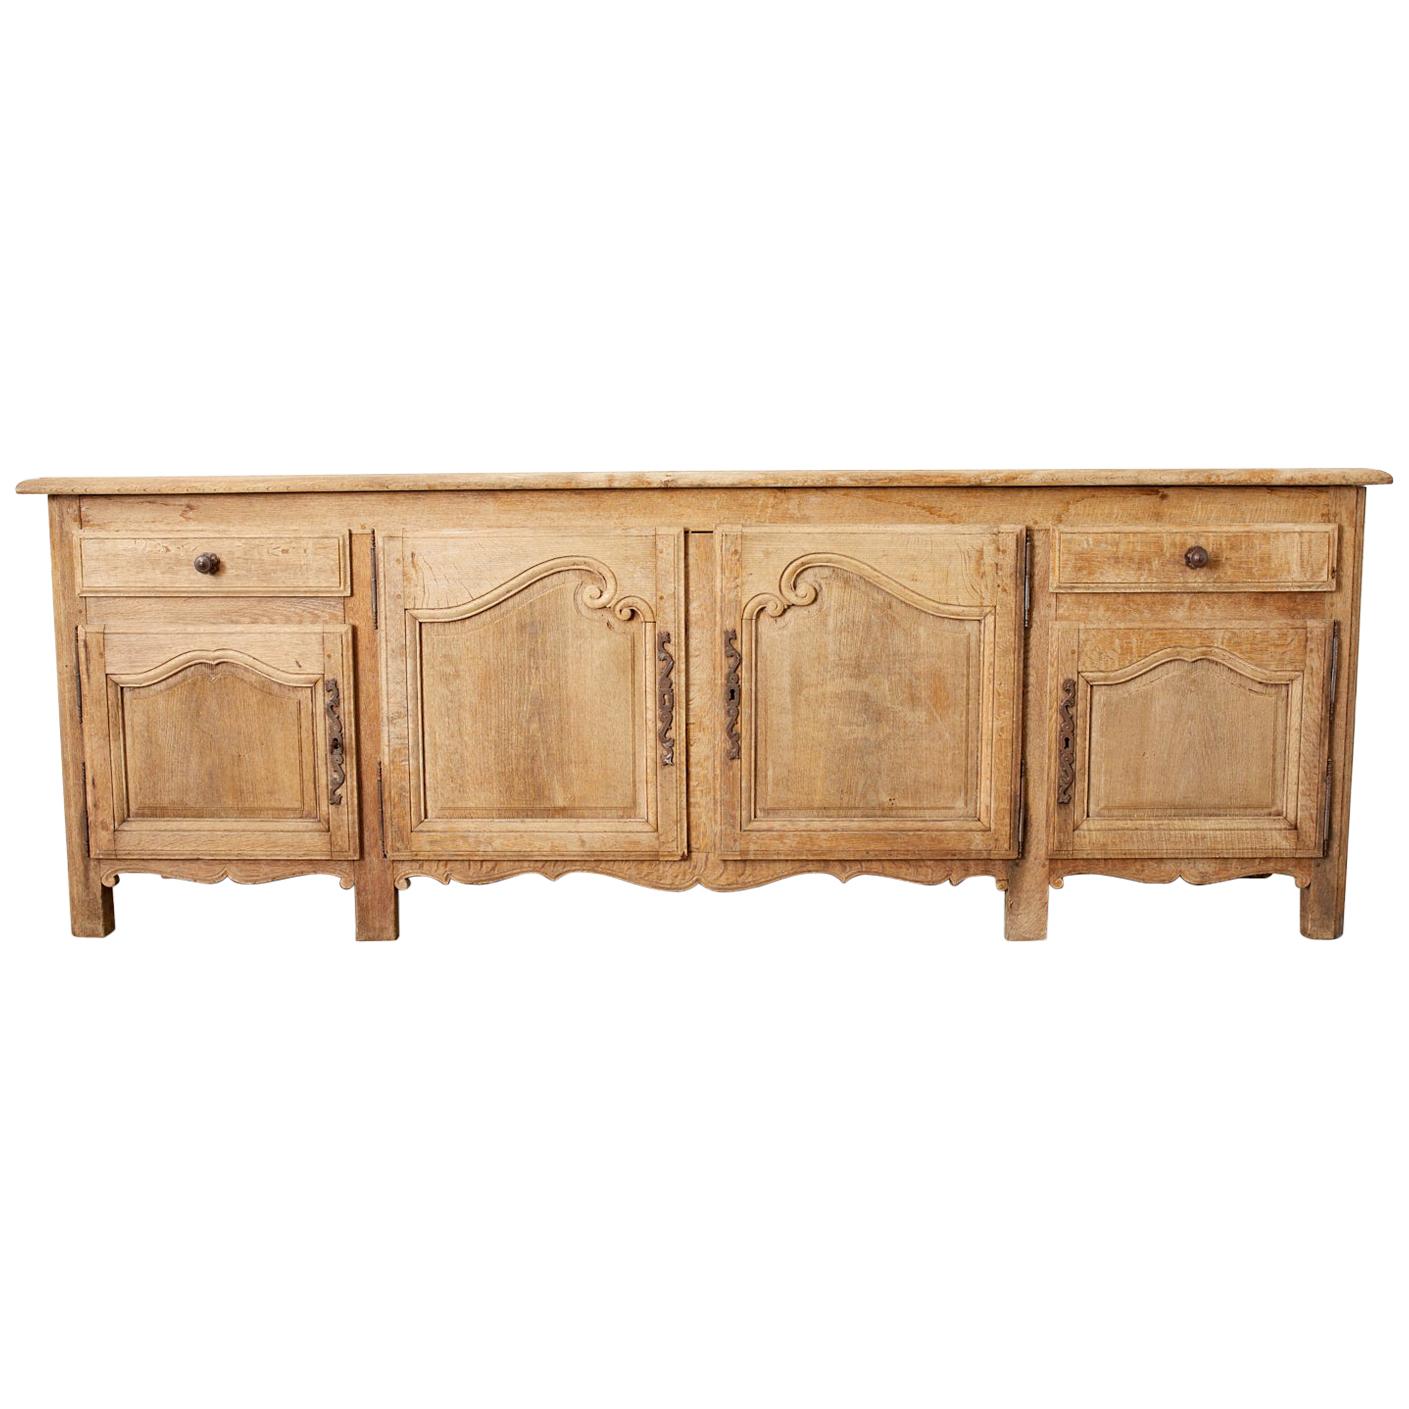 19th Century French Provincial Bleached Oak Sideboard Enfilade